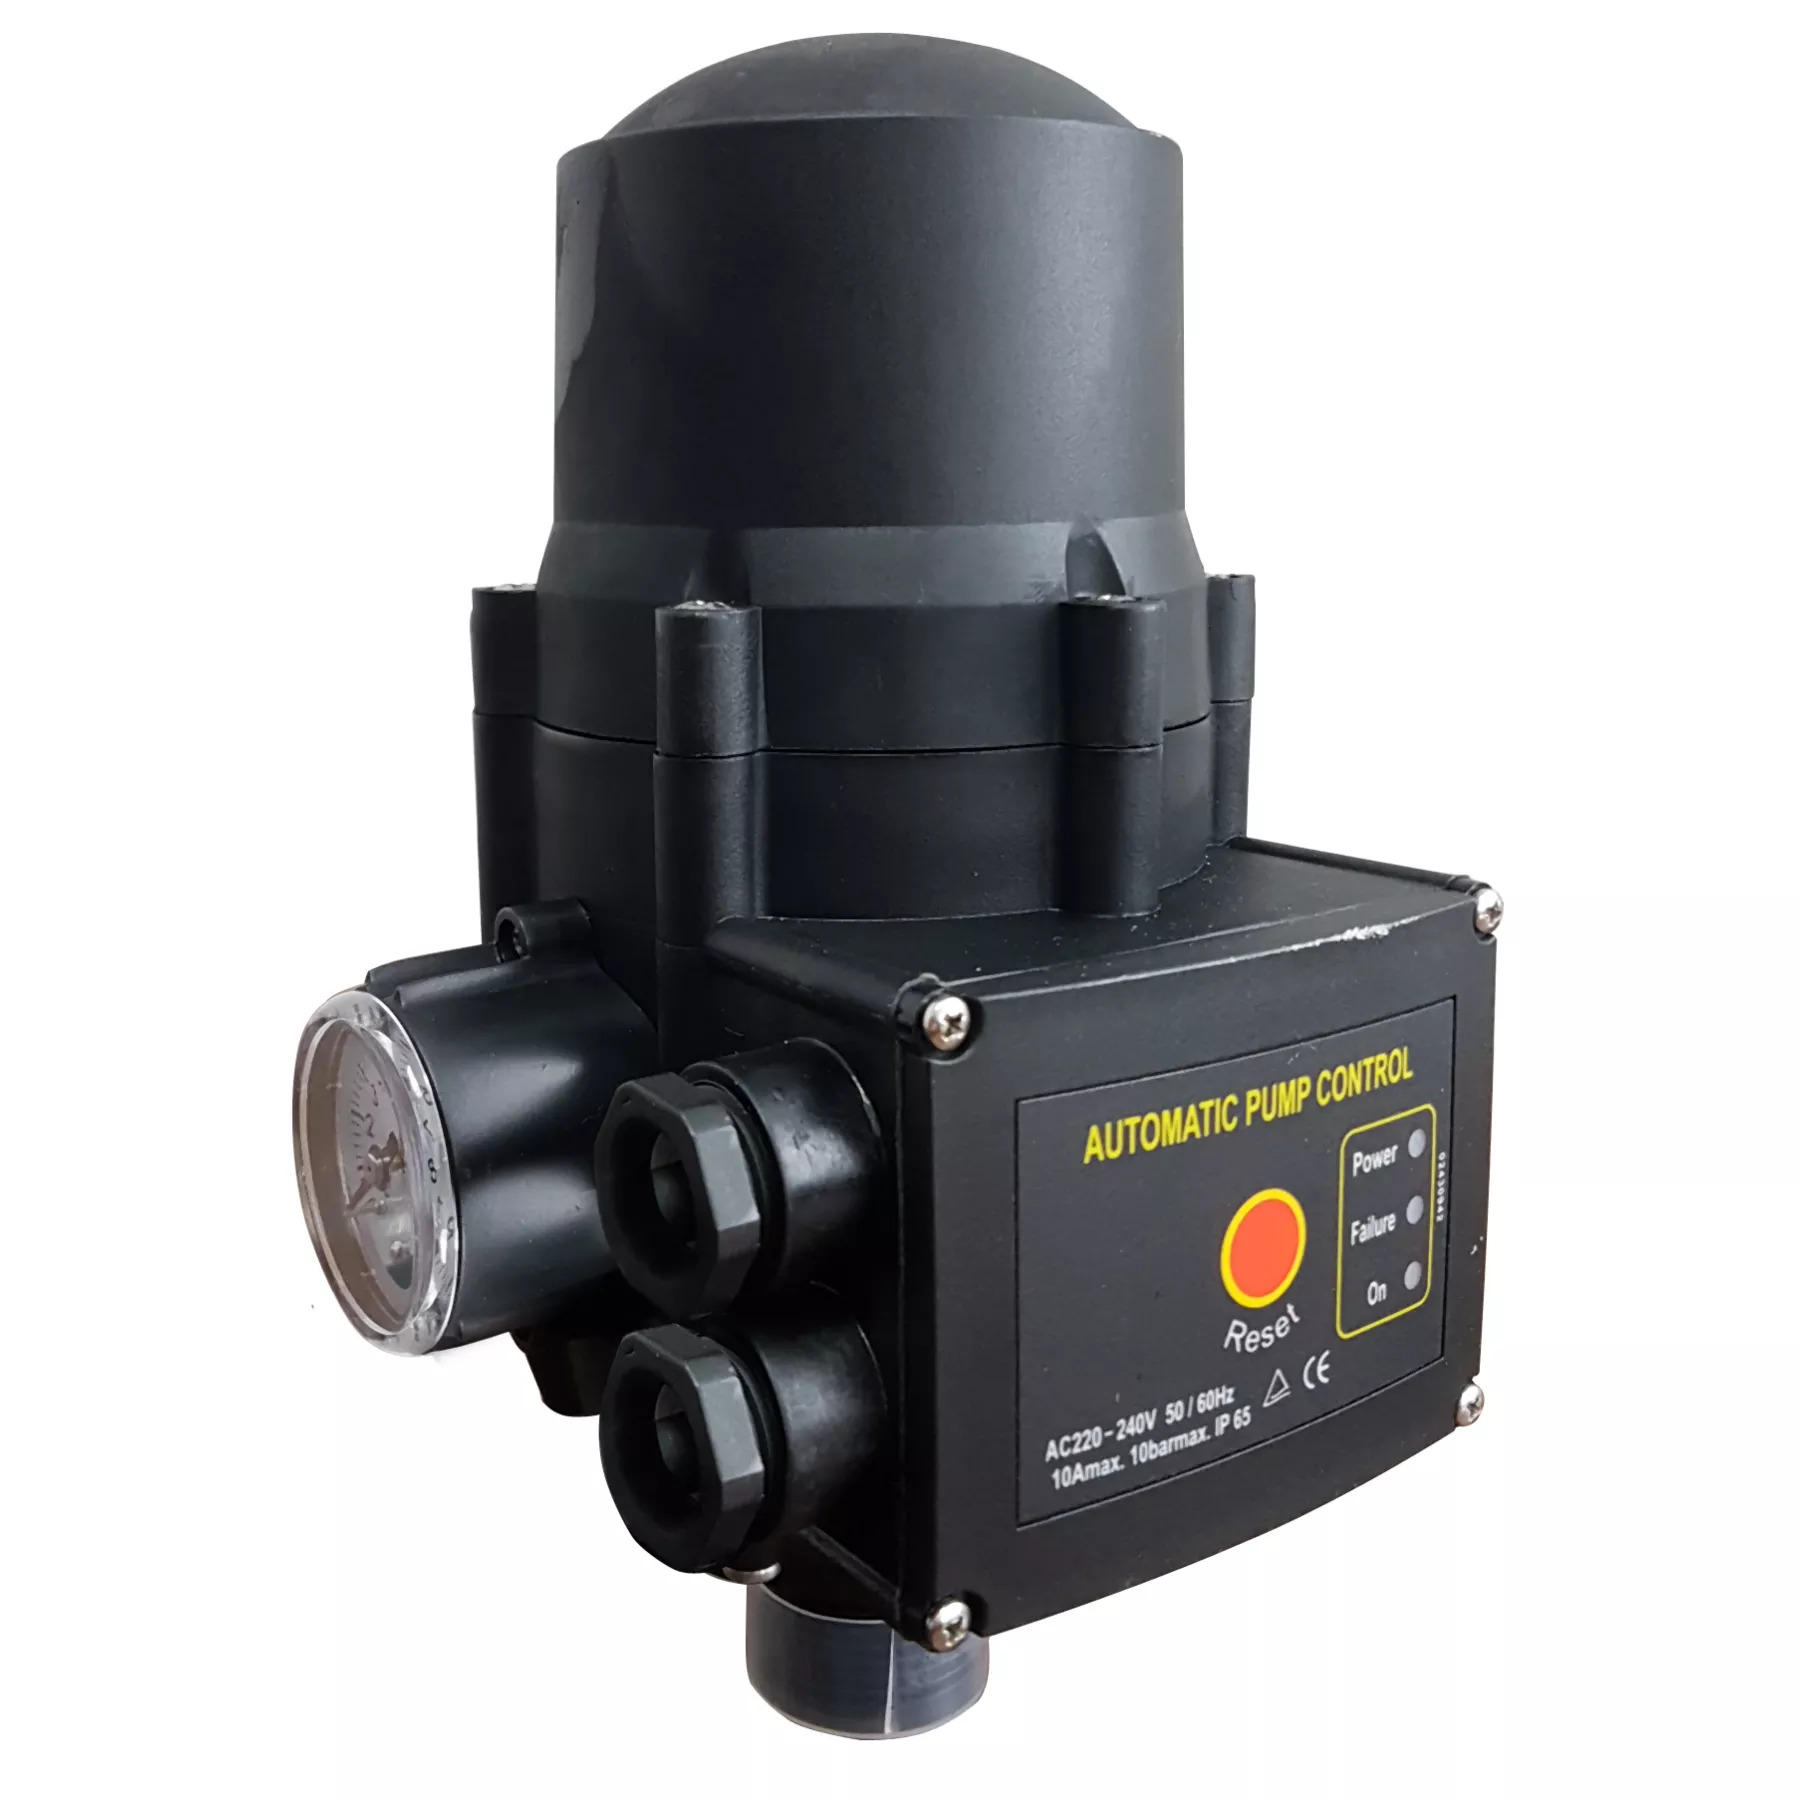 Pressure switch and dry-running protection DSK-10